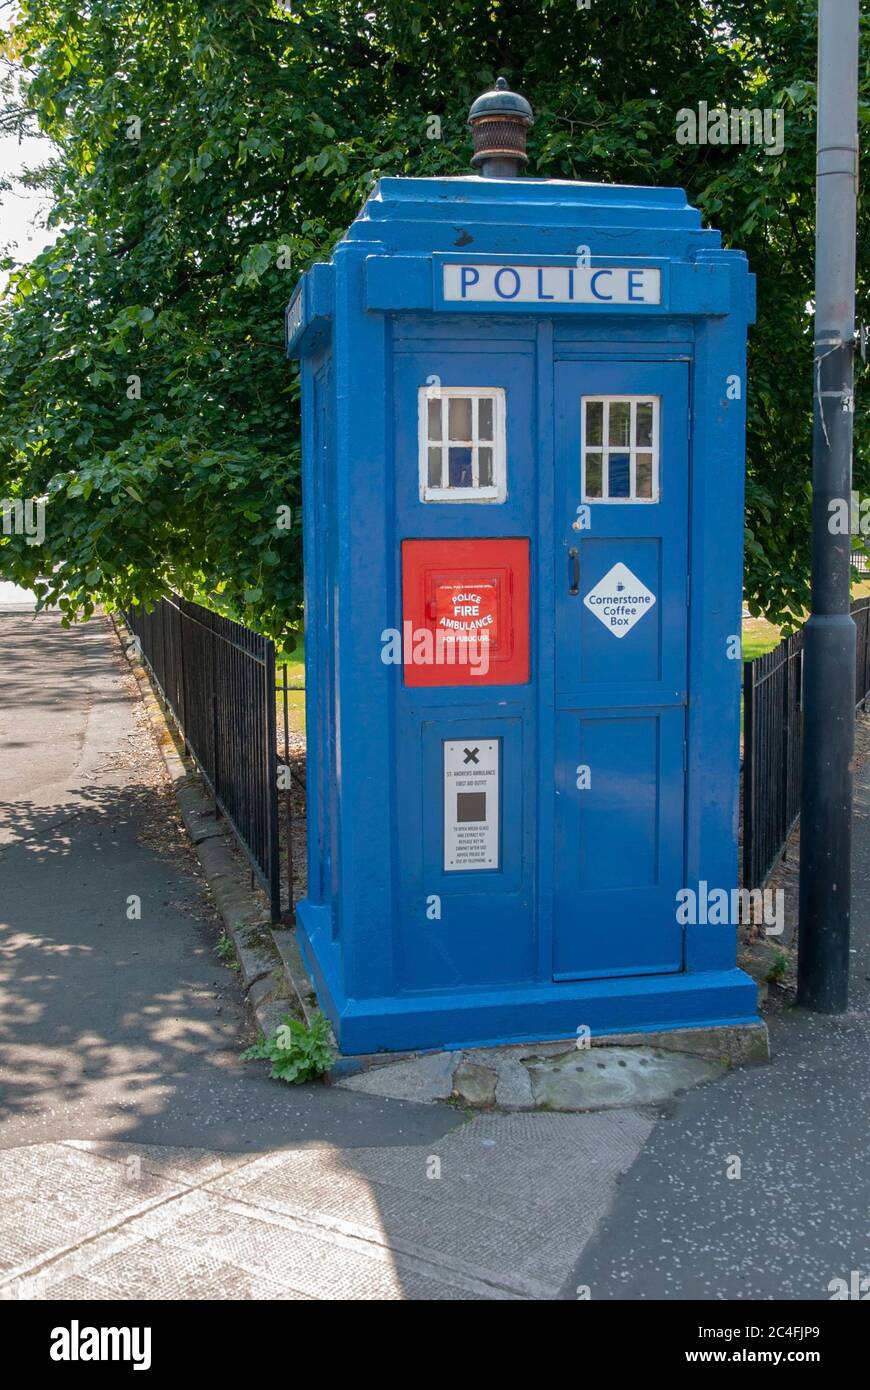 Blue Glasgow Police Box Dr Who Tardis Cathedral Square Gardens Castle Street Glasgow Scotland United Kingdom front door view of former city of glasgow Stock Photo